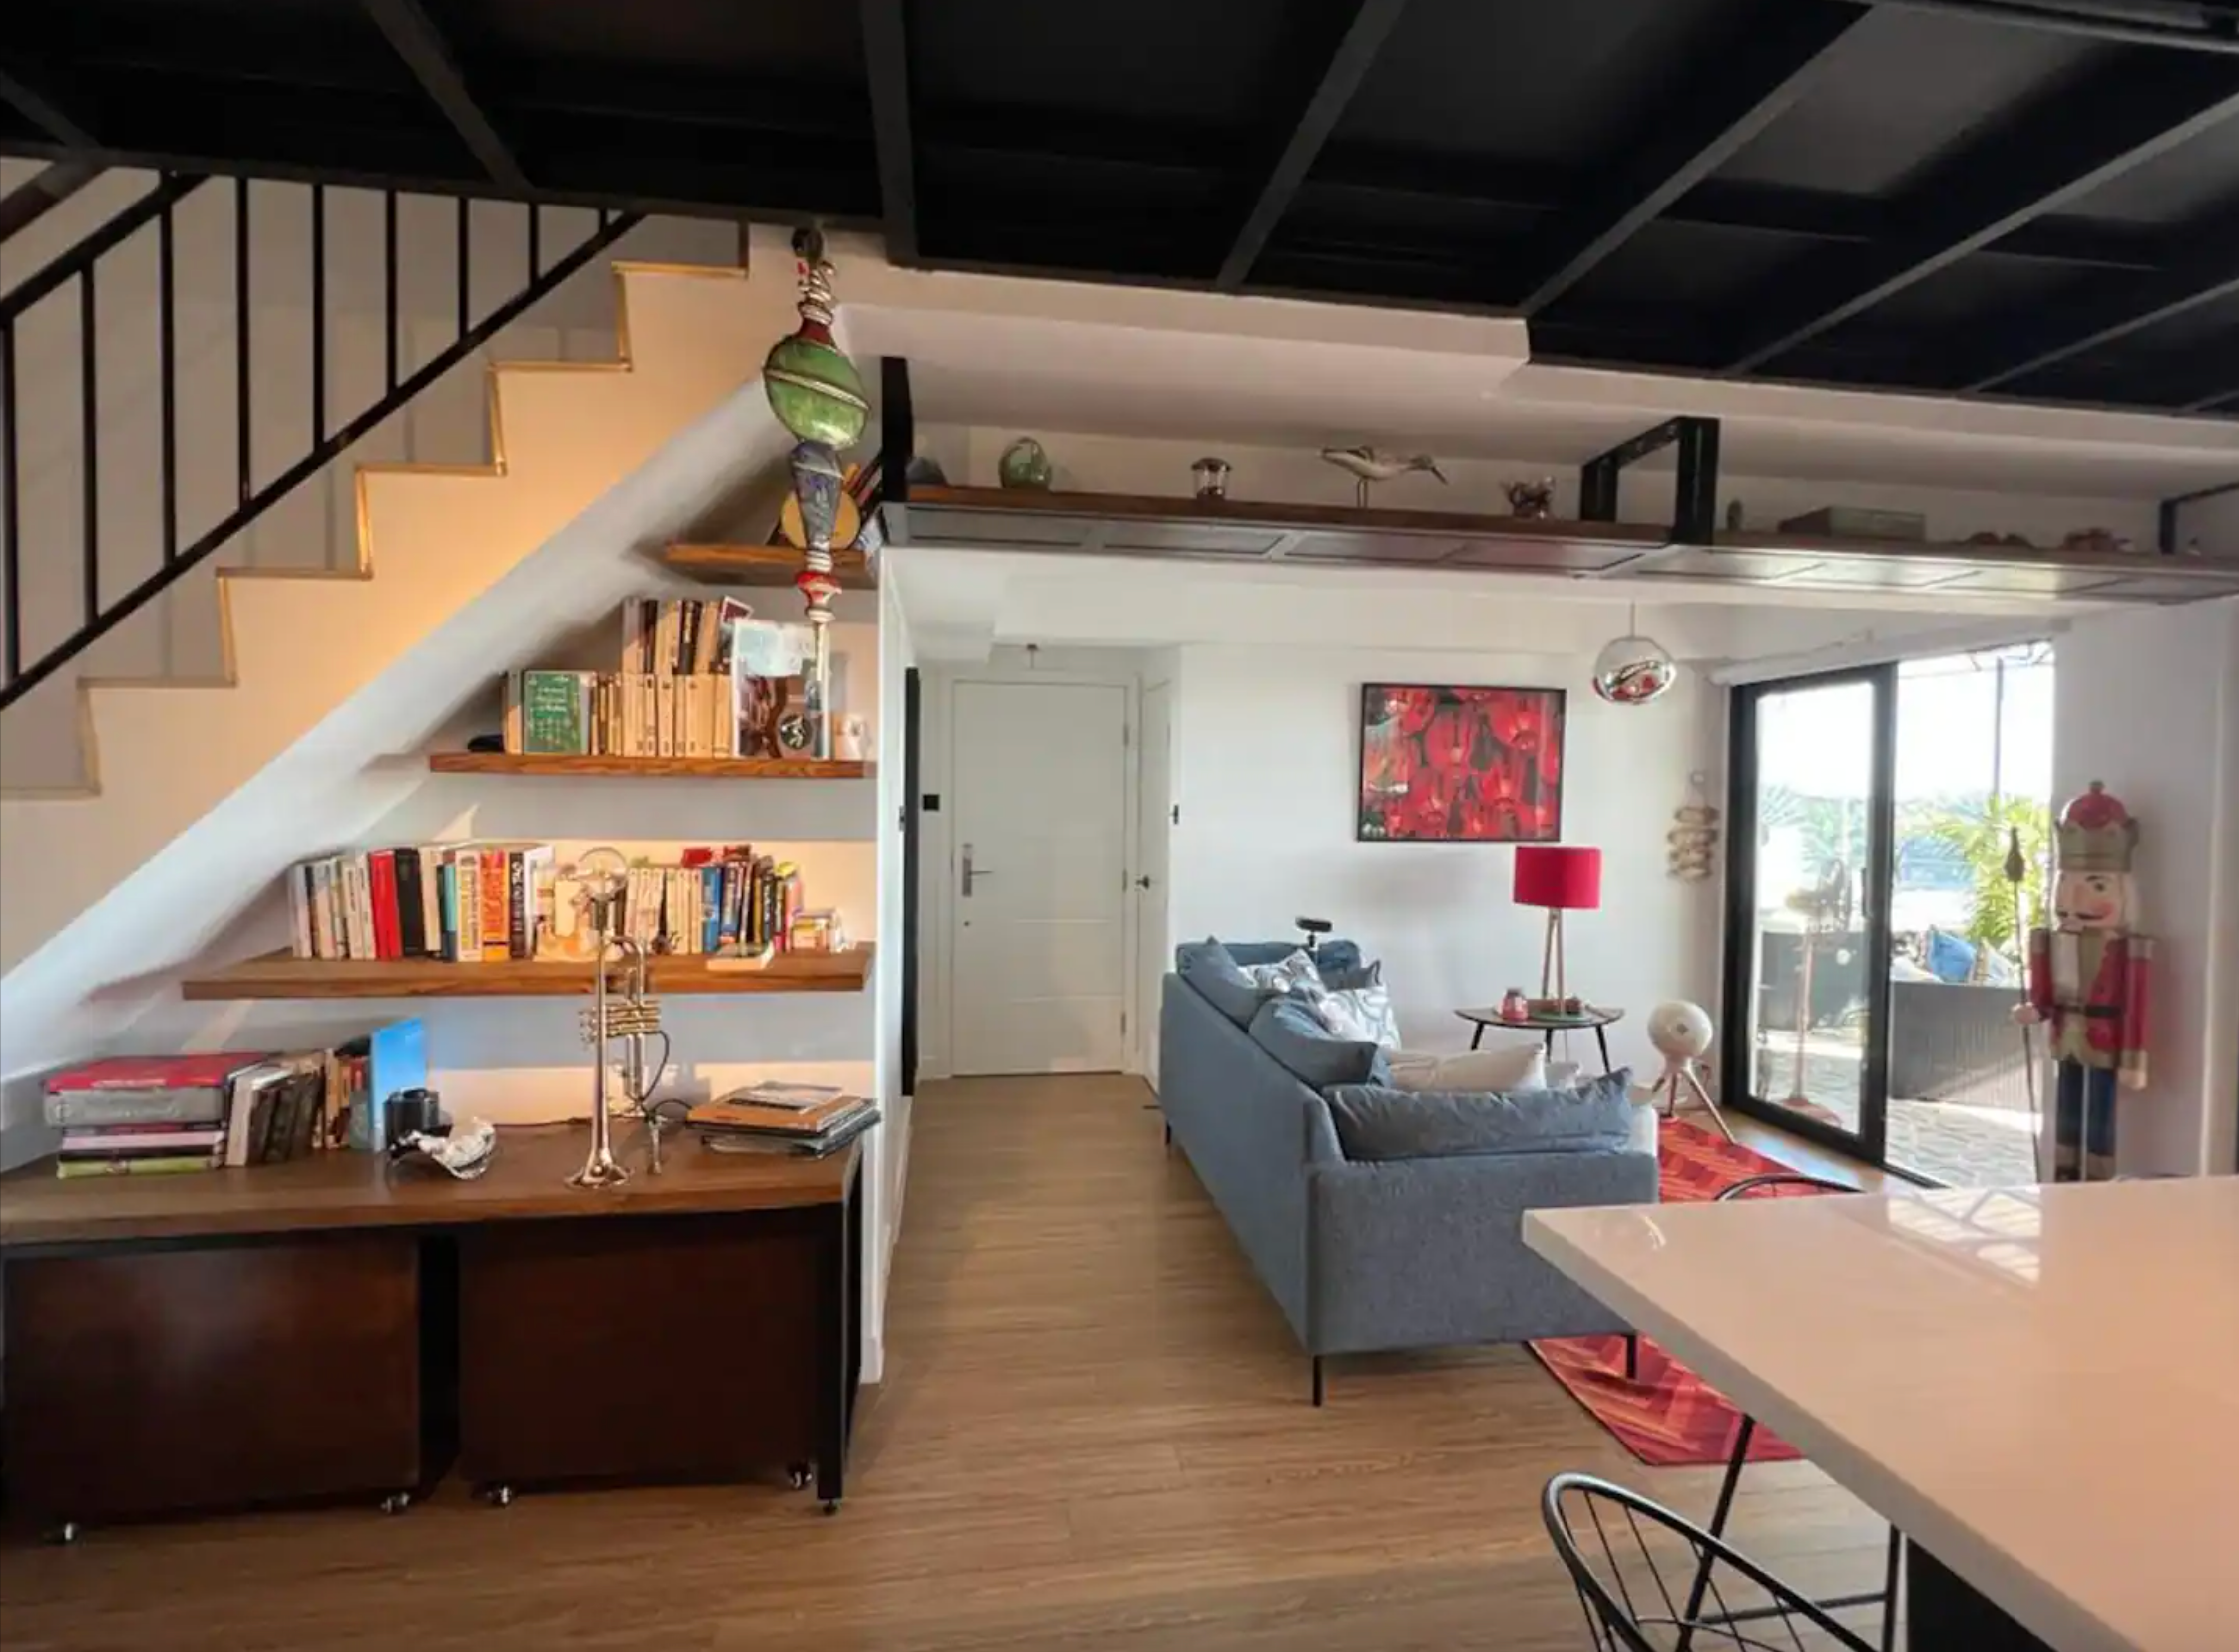 <p><strong>Bed & bath:</strong> 2 bedrooms, 2 baths<br> <strong>Top amenities:</strong> Serene location, sunset views, large outdoor terrace</p> <p>Experience another side of Hong Kong on Cheung Chau, a photogenic isle that swaps hectic city life for open-air seafood restaurants, quiet hiking trails, and crescent <a href="https://www.cntraveler.com/gallery/best-beach-airbnbs-in-the-world?mbid=synd_msn_rss&utm_source=msn&utm_medium=syndication">beaches</a>. Make the most of the peaceful atmosphere at this two-bedroom house, set atop a steep set of stairs. Inside, find a modern open kitchen, spacious living room, projector screen, and artsy decor, while an outdoor terrace offers a plancha (flat-top griddle) and hot tub with spectacular sunset views. When you’re ready to rejoin society, restaurants, shops, and beaches are about a 15-minute walk away, while a 35-minute ferry ride will take you back to Central. Another calling card? Daily housekeeping is included.</p> $457, Airbnb (starting price). <a href="https://www.airbnb.com/rooms/726308559933008239">Get it now!</a><p>Sign up to receive the latest news, expert tips, and inspiration on all things travel</p><a href="https://www.cntraveler.com/newsletter/the-daily?sourceCode=msnsend">Inspire Me</a>